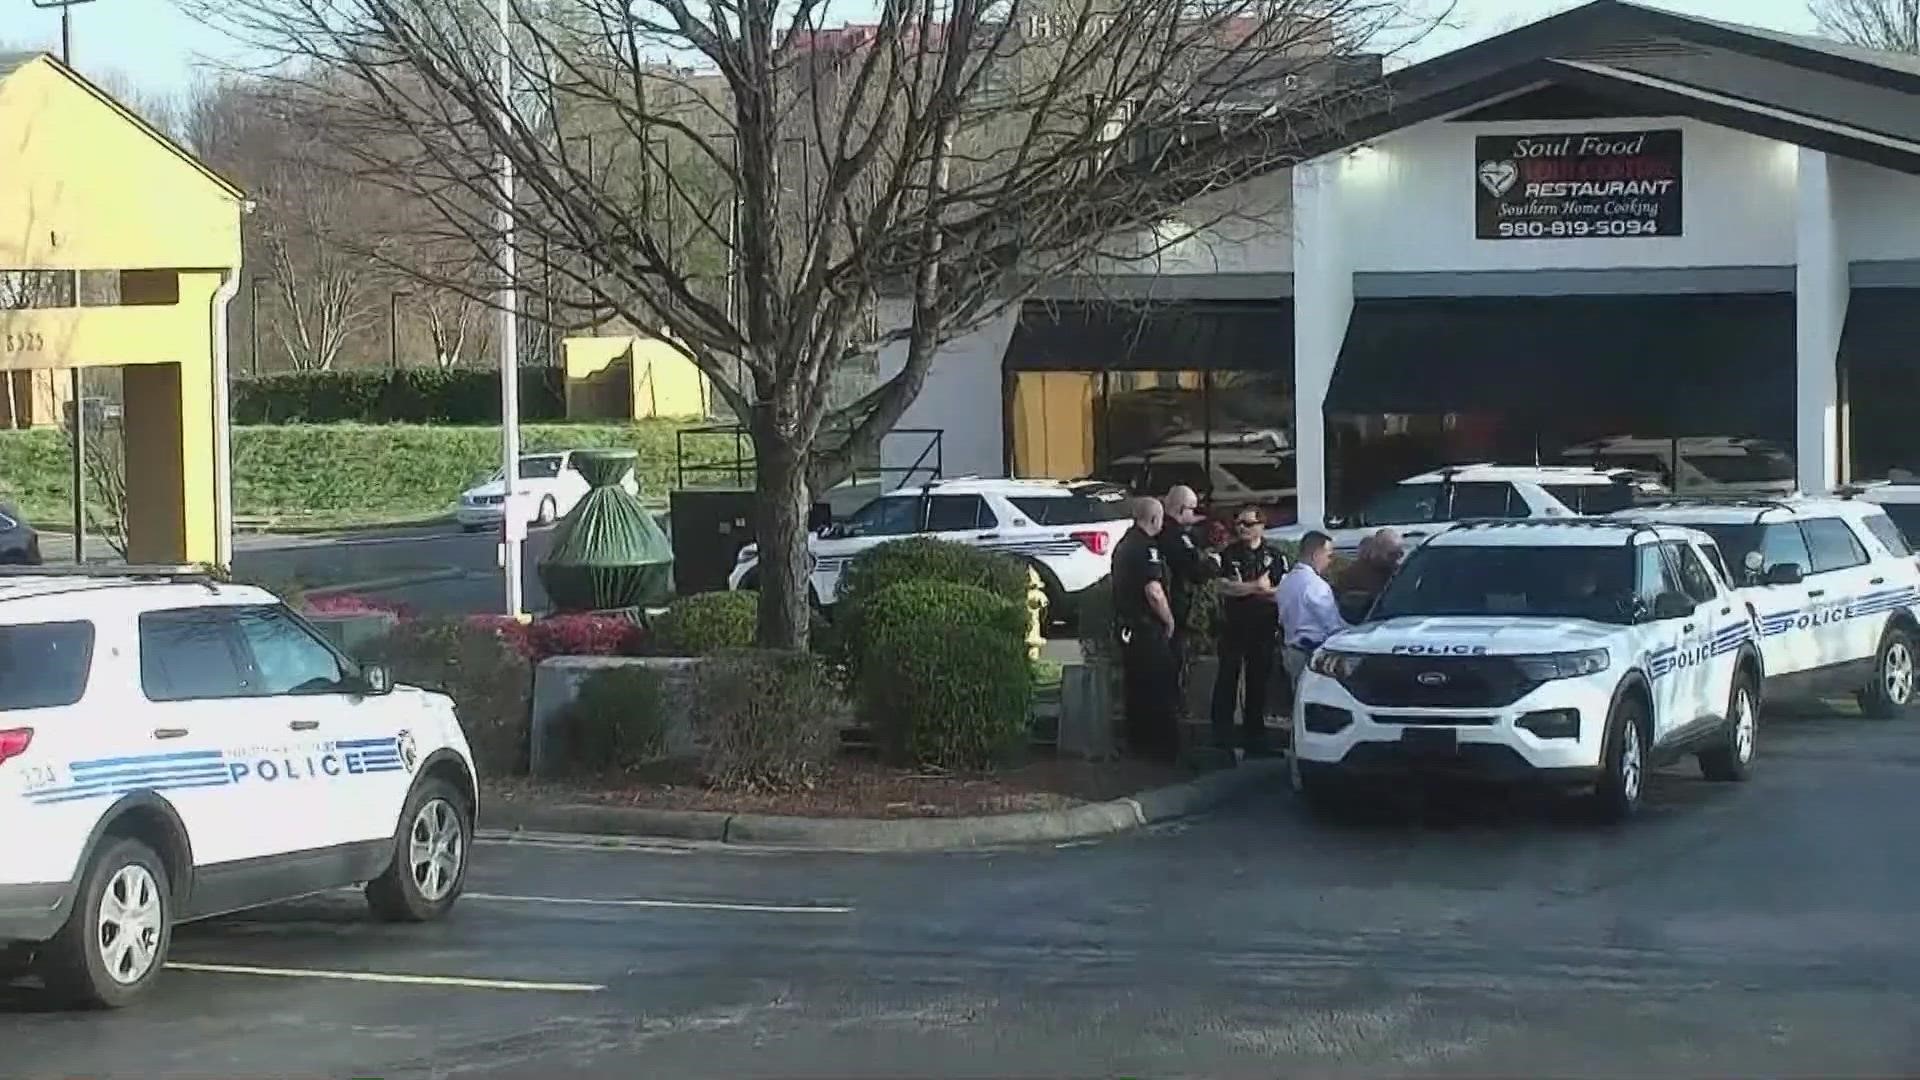 One person was rushed to the hospital with life-threatening injuries following a shooting along North Tryon Street Friday morning, Medic confirmed.